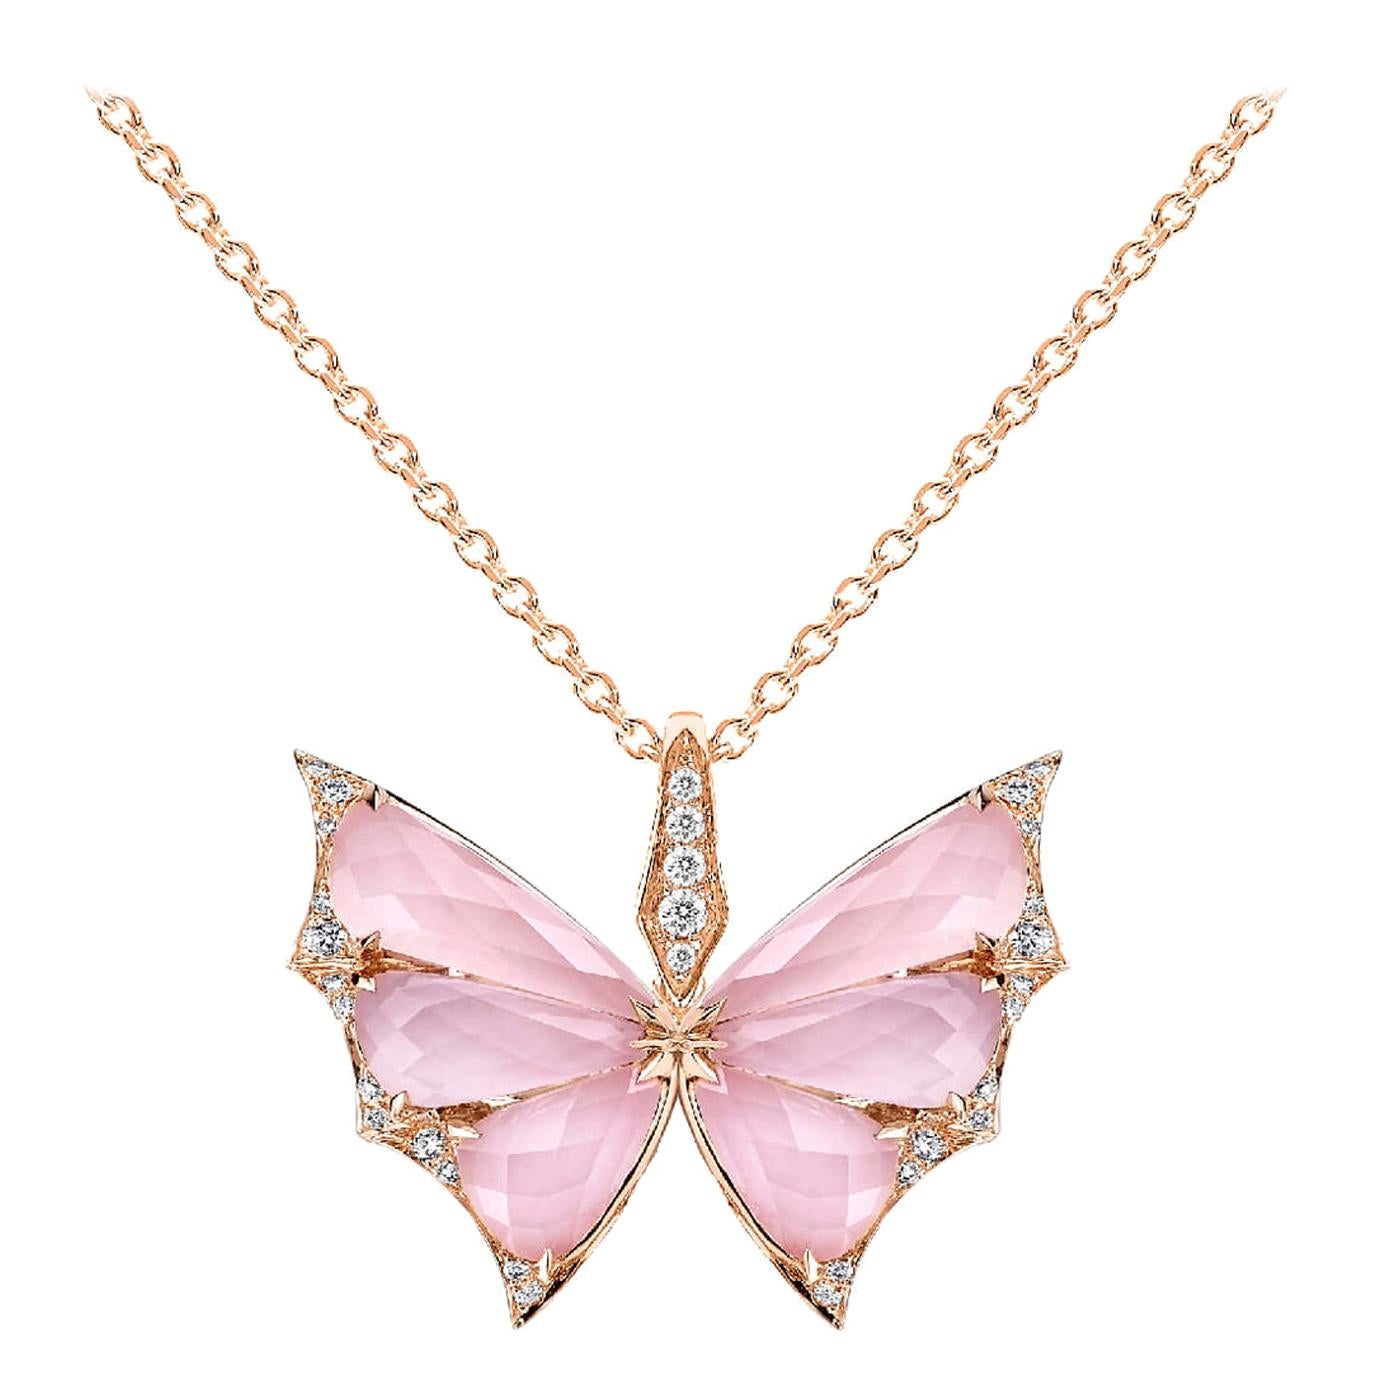 Stephen Webster Fly by Night Pink Opal Crystal Haze and White Diamond Pendant